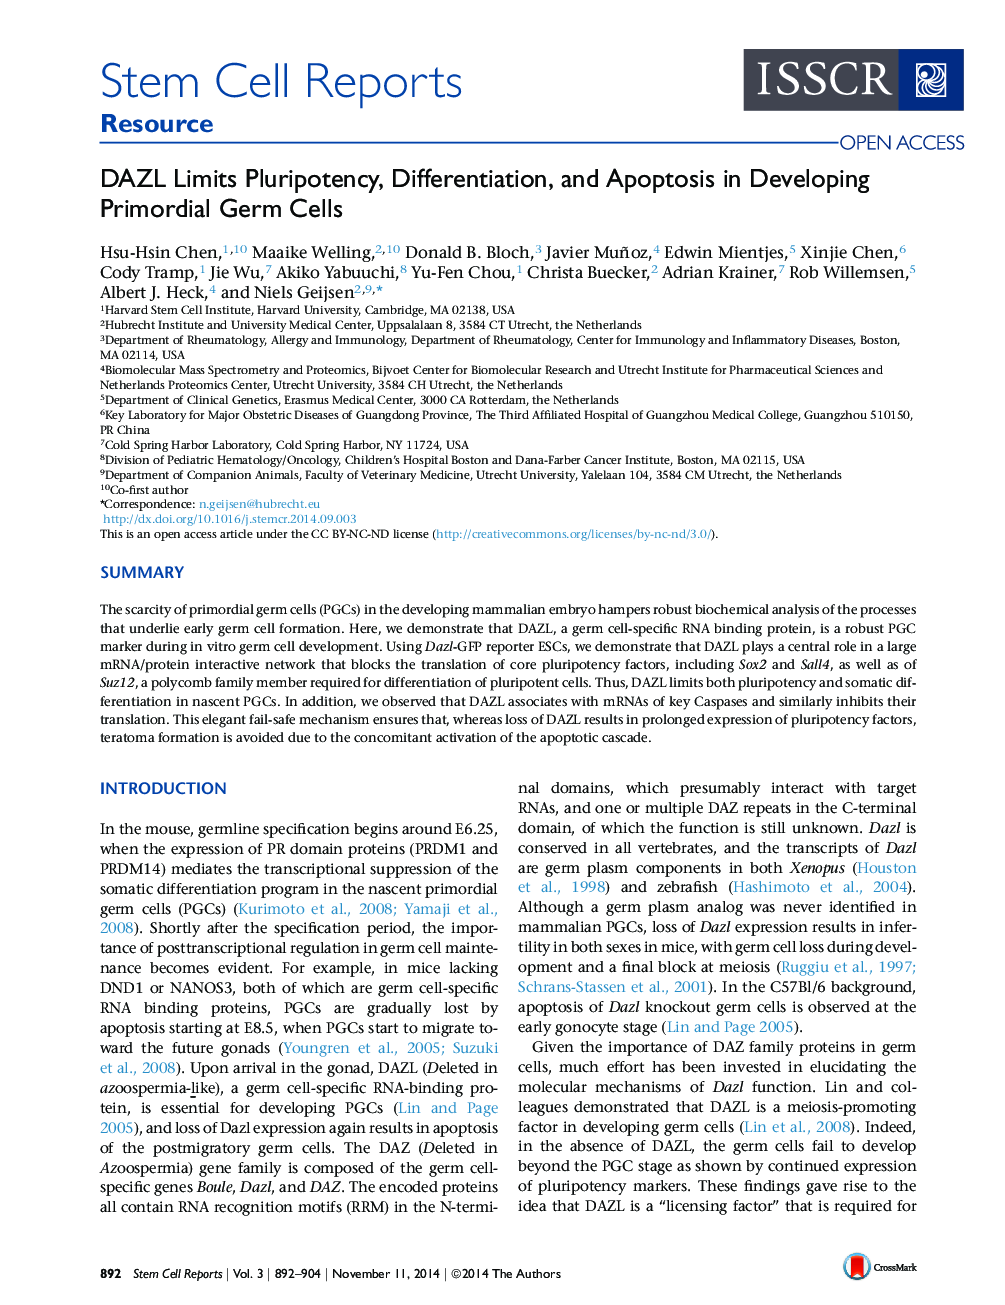 DAZL Limits Pluripotency, Differentiation, and Apoptosis in Developing Primordial Germ Cells 